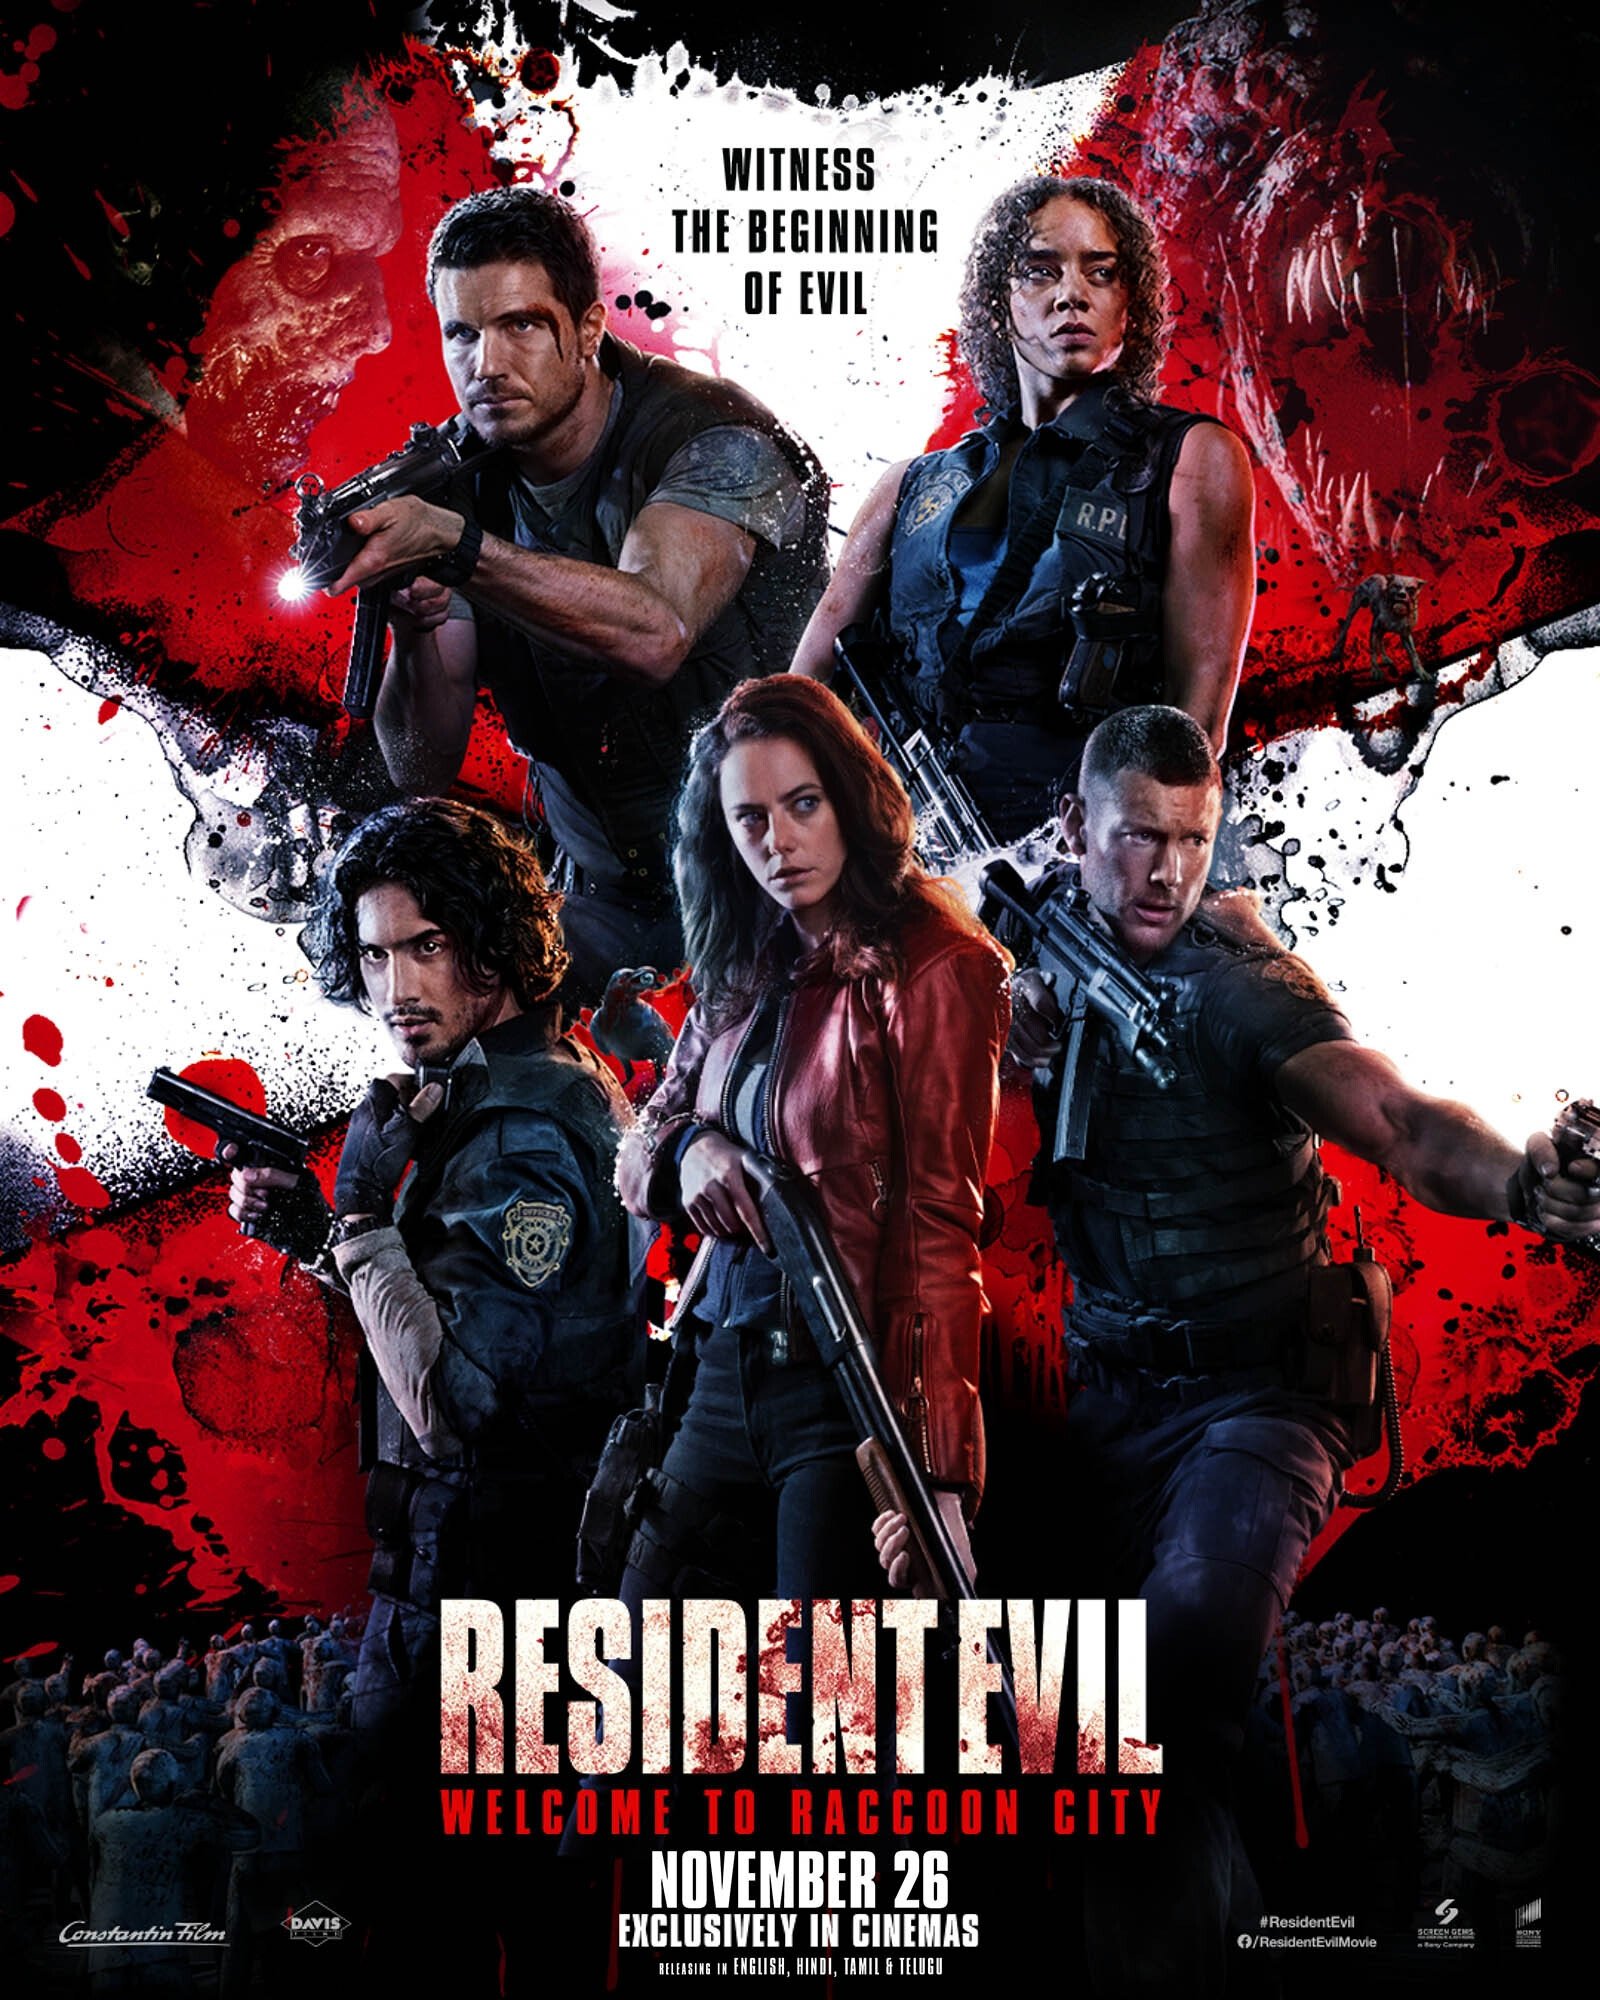 A movie poster for the live-action Resident Evil: Welcome to Raccoon City film, featuring the main cast of survivors brandishing their weapons and looking determined in from of a crude rendition of the Umbrella Corporation logo with the red parts reminiscent of spattered blood. 